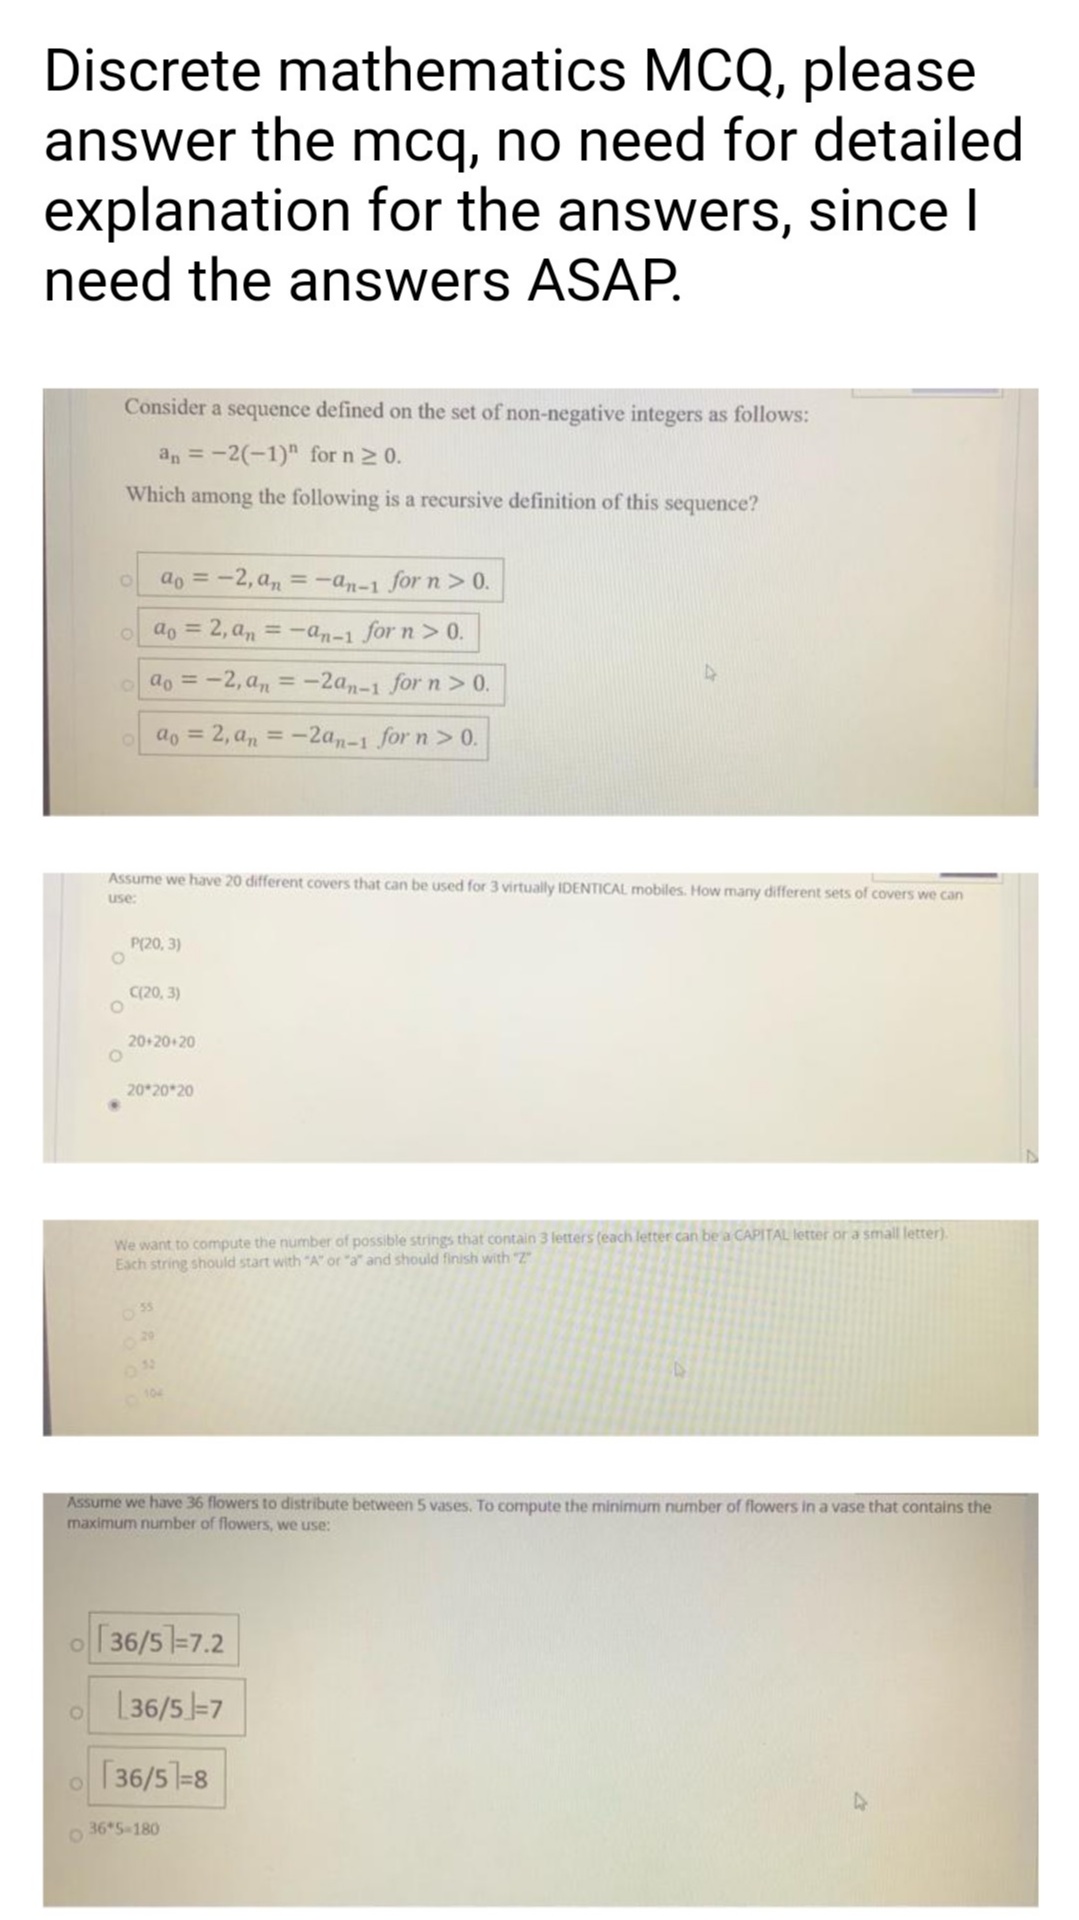 Discrete mathematics MCQ, please
answer the mcq, no need for detailed
explanation for the answers, since I
need the answers ASAP.
Consider a sequence defined on the set of non-negative integers as follows:
an = -2(-1)" for n2 0.
Which among the following is a recursive definition of this sequence?
ao = -2, an = -an-1 for n> 0.
o ao = 2, a, = -an-1 for n > 0.
ao = -2, a, = -2an-1 for n > 0.
%3D
ao = 2, a, = -2a,-1 for n> 0.
%3D
%3D
Assume we have 20 different covers that can be used for 3 virtually IDENTICAL mobiles. How many different sets of covers we can
use:
P(20, 3)
C(20, 3)
20+20+20
20 20 20
We want to compute the number of possible strings that contain 3 letters (each letter can be a CAPITAL letter or a small letter).
Each string should start with "A" or "a" and should finish with "Z
Assume we have 36 flowers to distribute between 5 vases. To compute the minimum number of flowers in a vase that contains the
maximum number of flowers, we use:
o 36/5=7.2
[ 36/5 =7
[36/5=8
36 5-180
